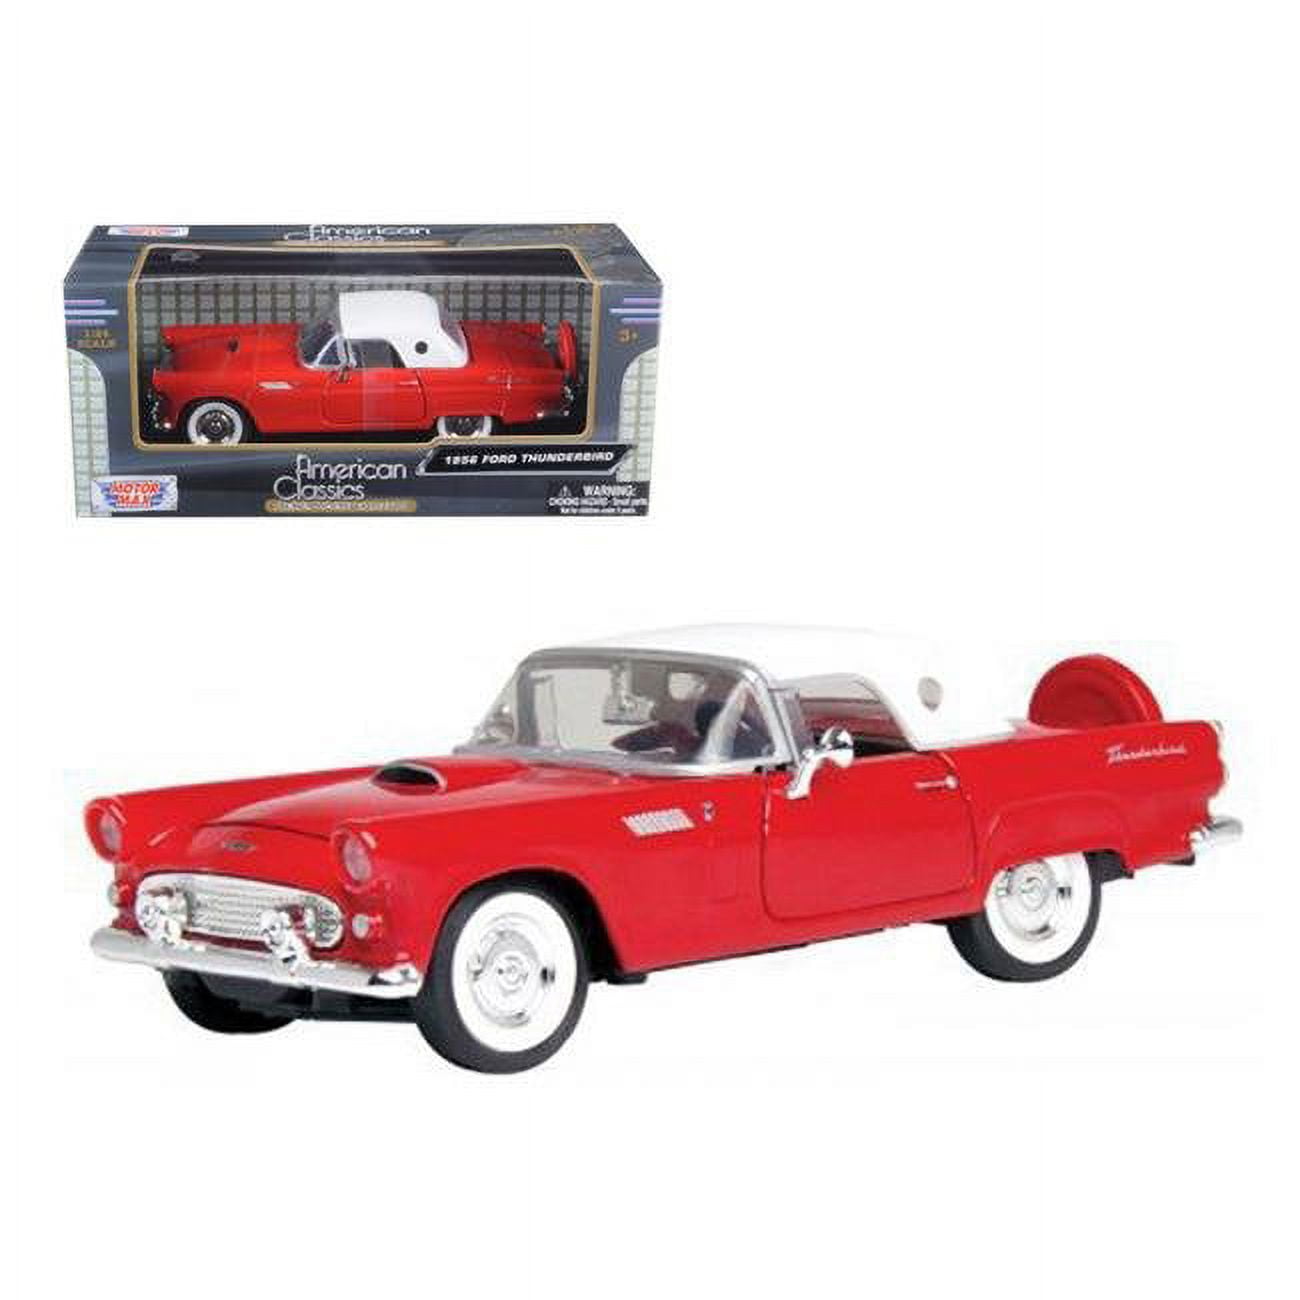 1 by 24 1956 Ford Thunderbird Diecast Car Model, Red -  Play4Hours, PL994572